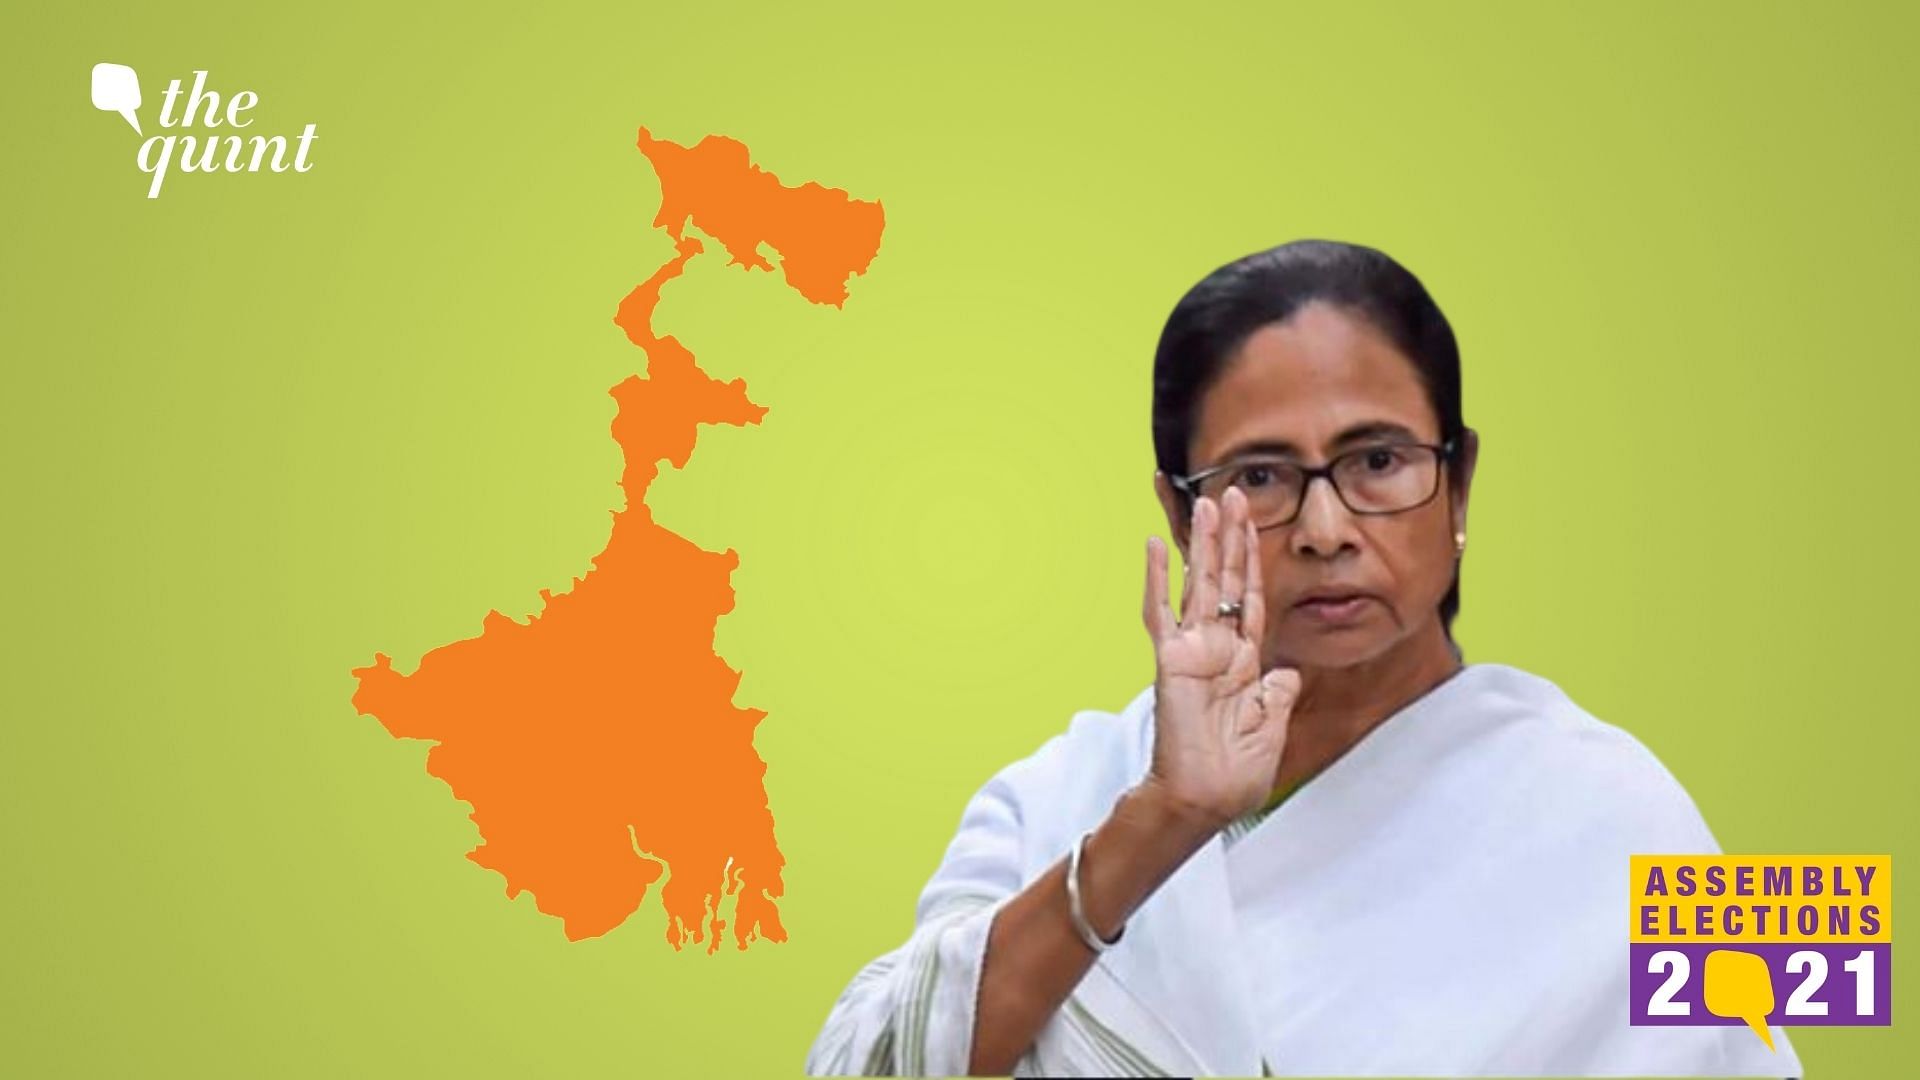 West Bengal Chief Minister Mamata Banerjee, on Wednesday, 24 March, said that “outsiders”, as per her party, are only those people who are sent from other states to foment trouble before elections, not those who have been living in West Bengal since ages.